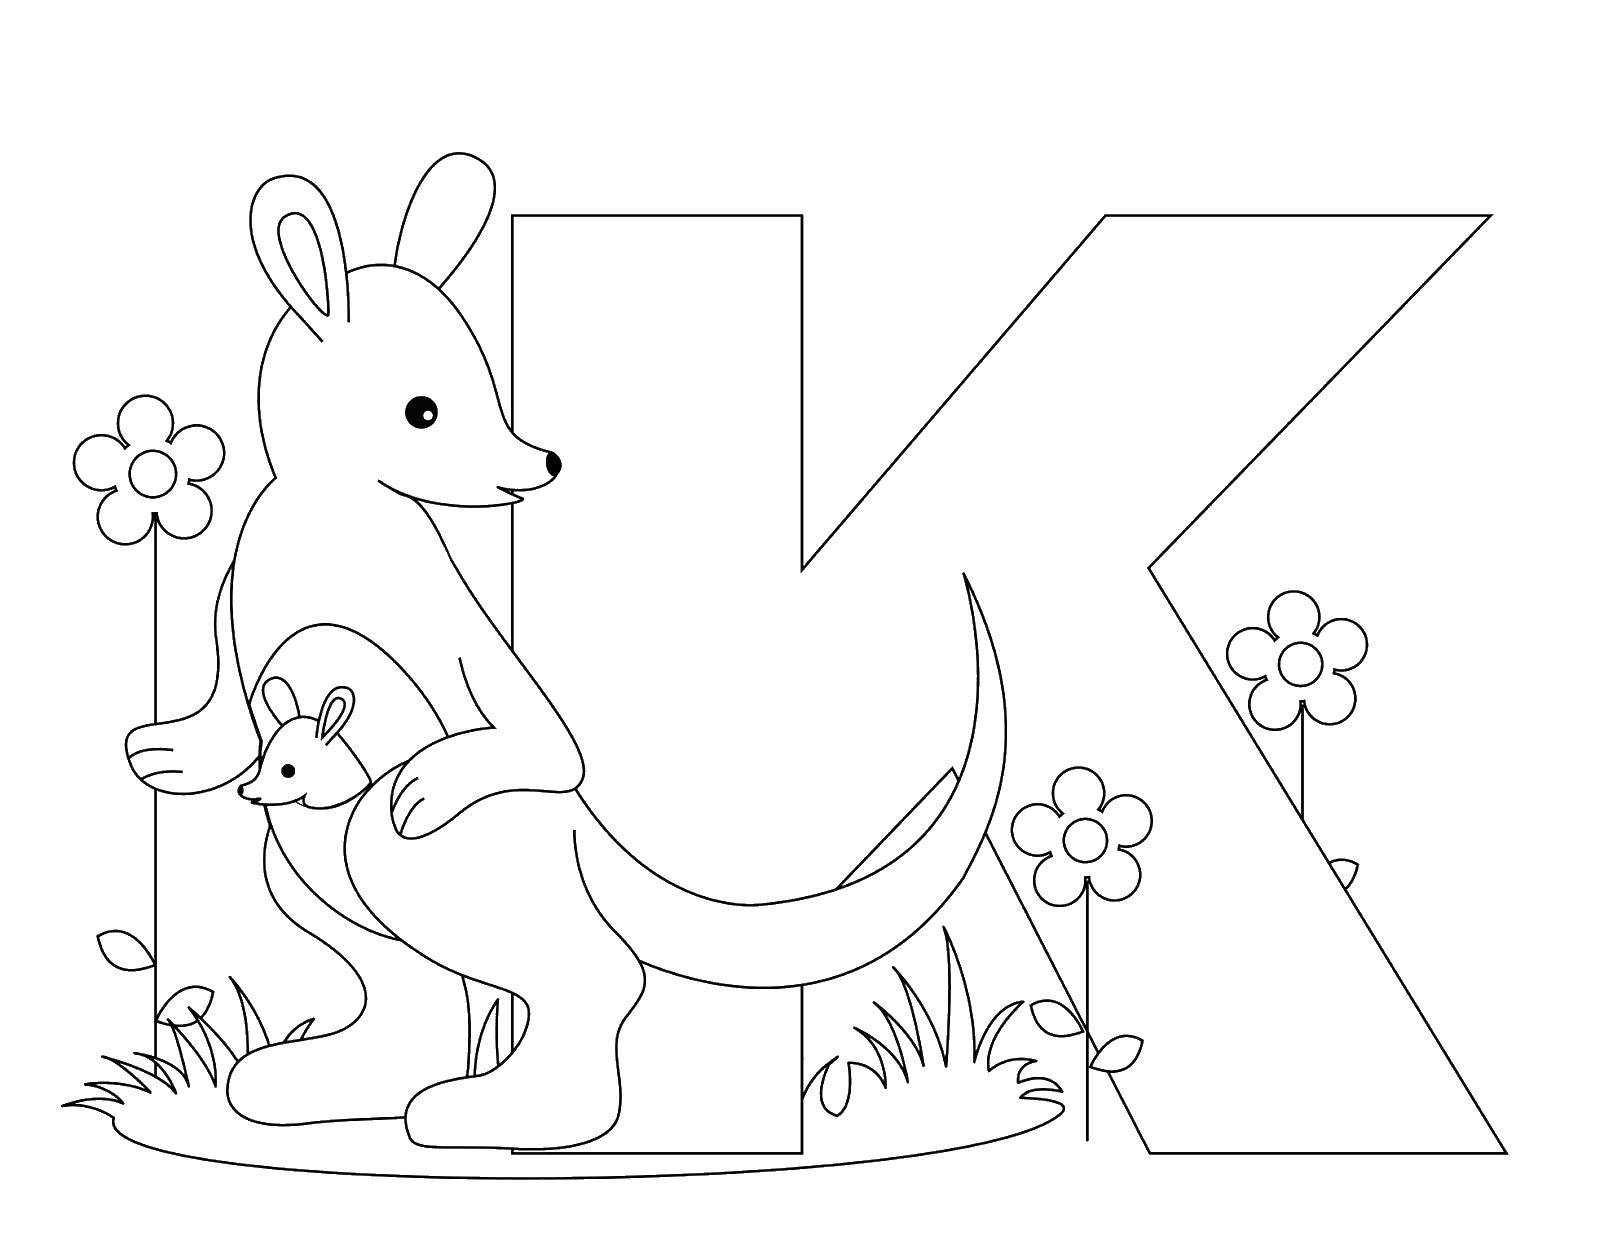 Coloring Kangaroo letter K. Category English alphabet. Tags:  The alphabet, letters, words.